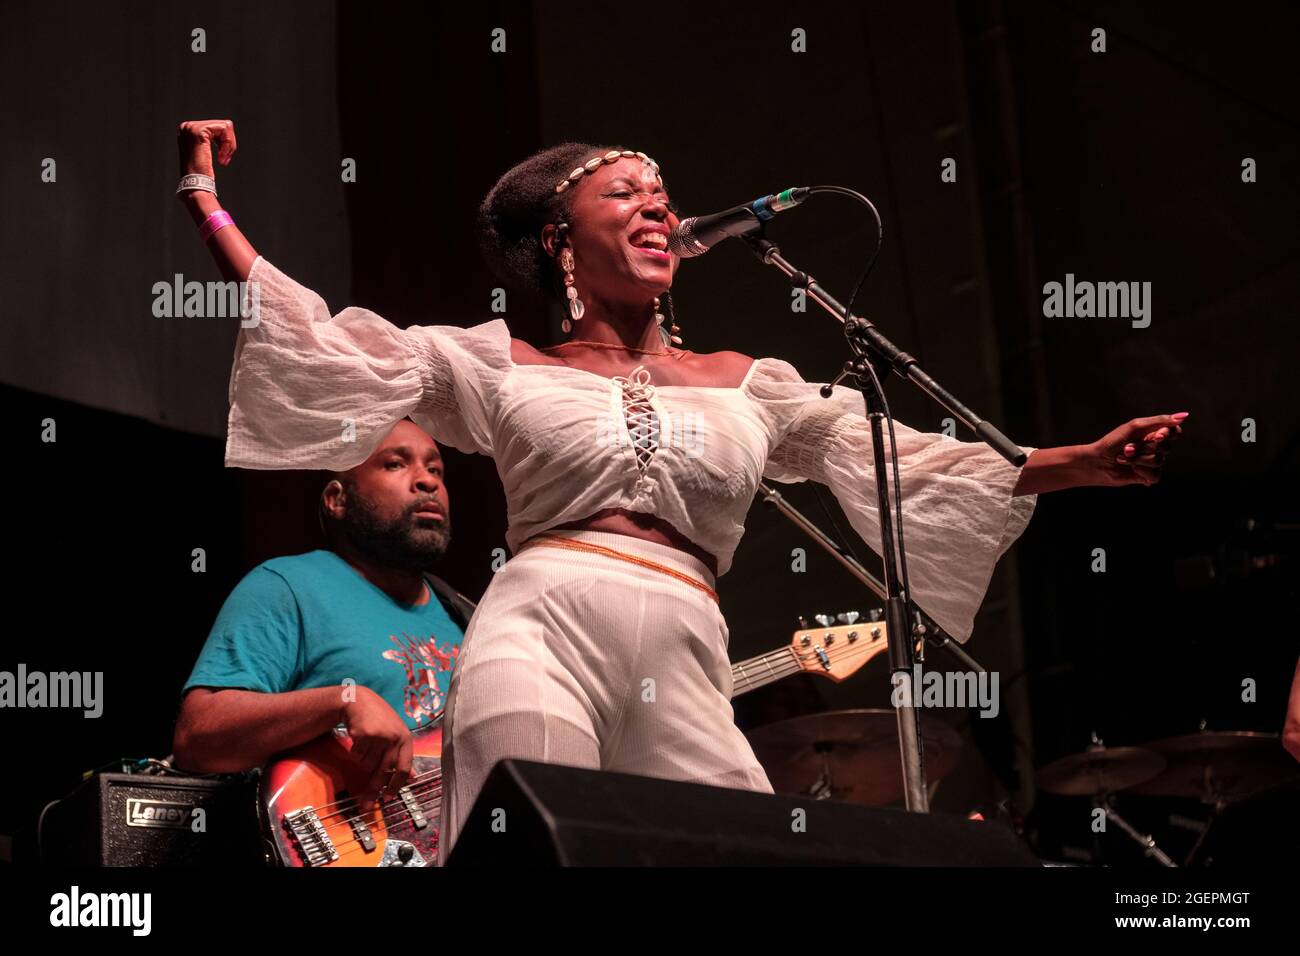 Farnham, UK, 20 August 2021. Caron Wheeler of iconic British soul band Soul II Soul performs at Weyfest. Credit: MusicLive/Alamy Live News Stock Photo